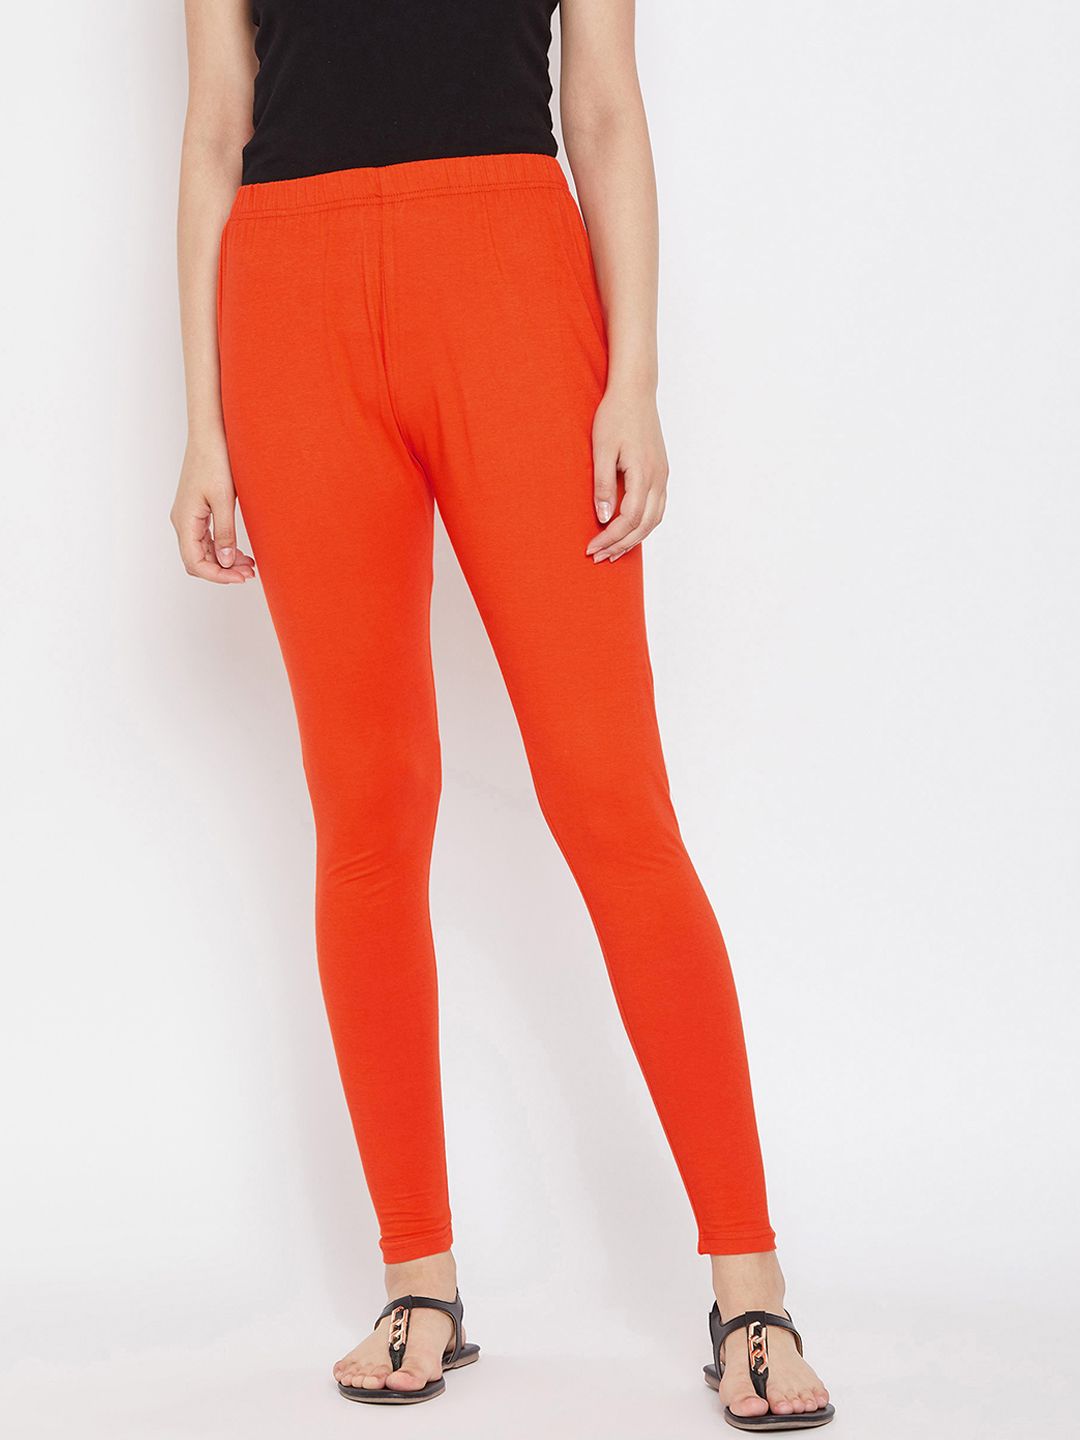 Camey Women Orange Solid Ankle-Length Leggings Price in India